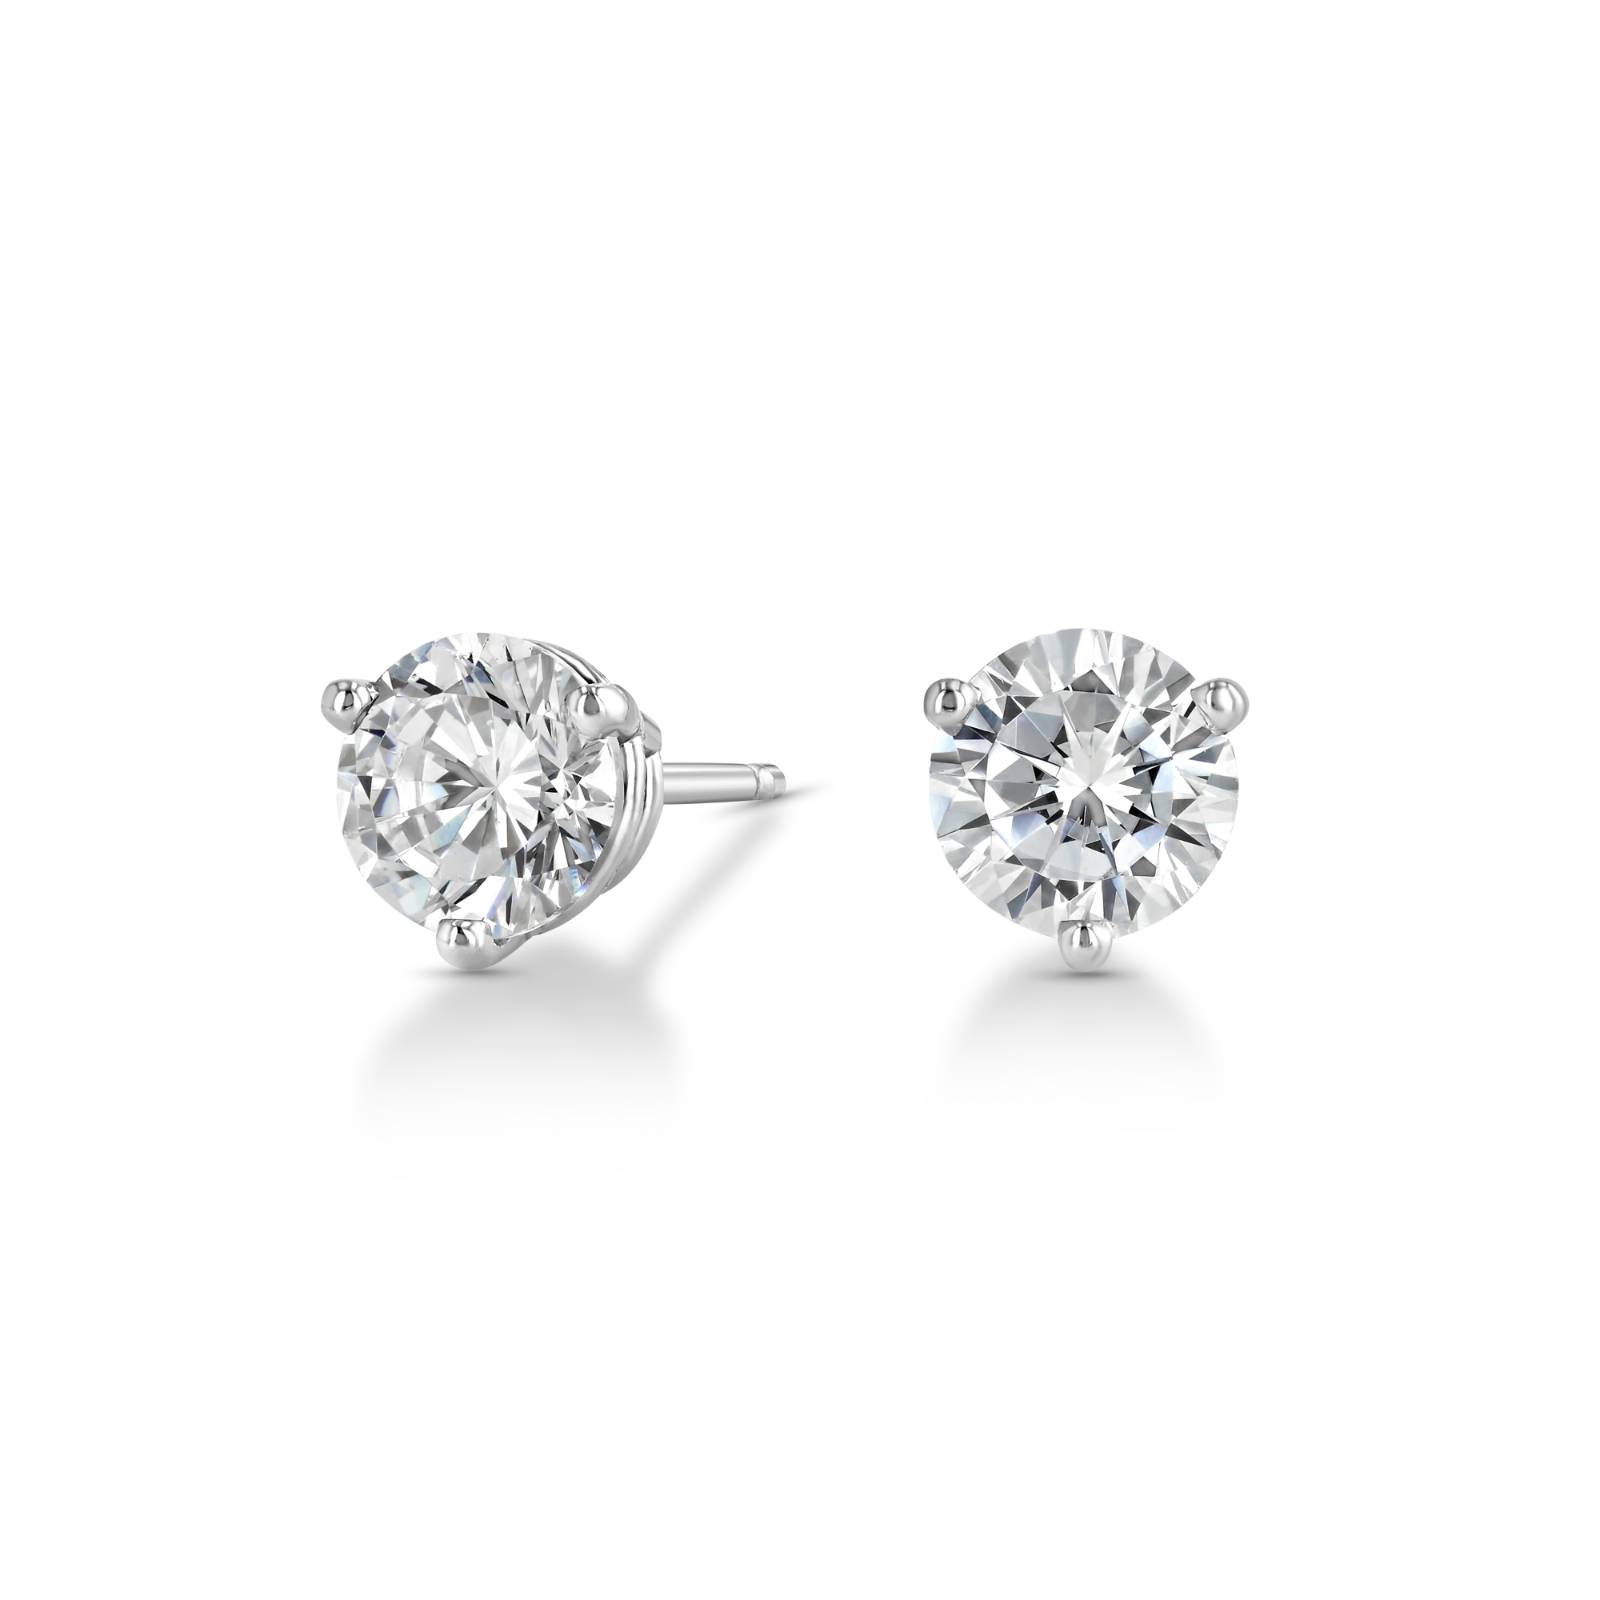 Orion Three-Prong Stud Earrings